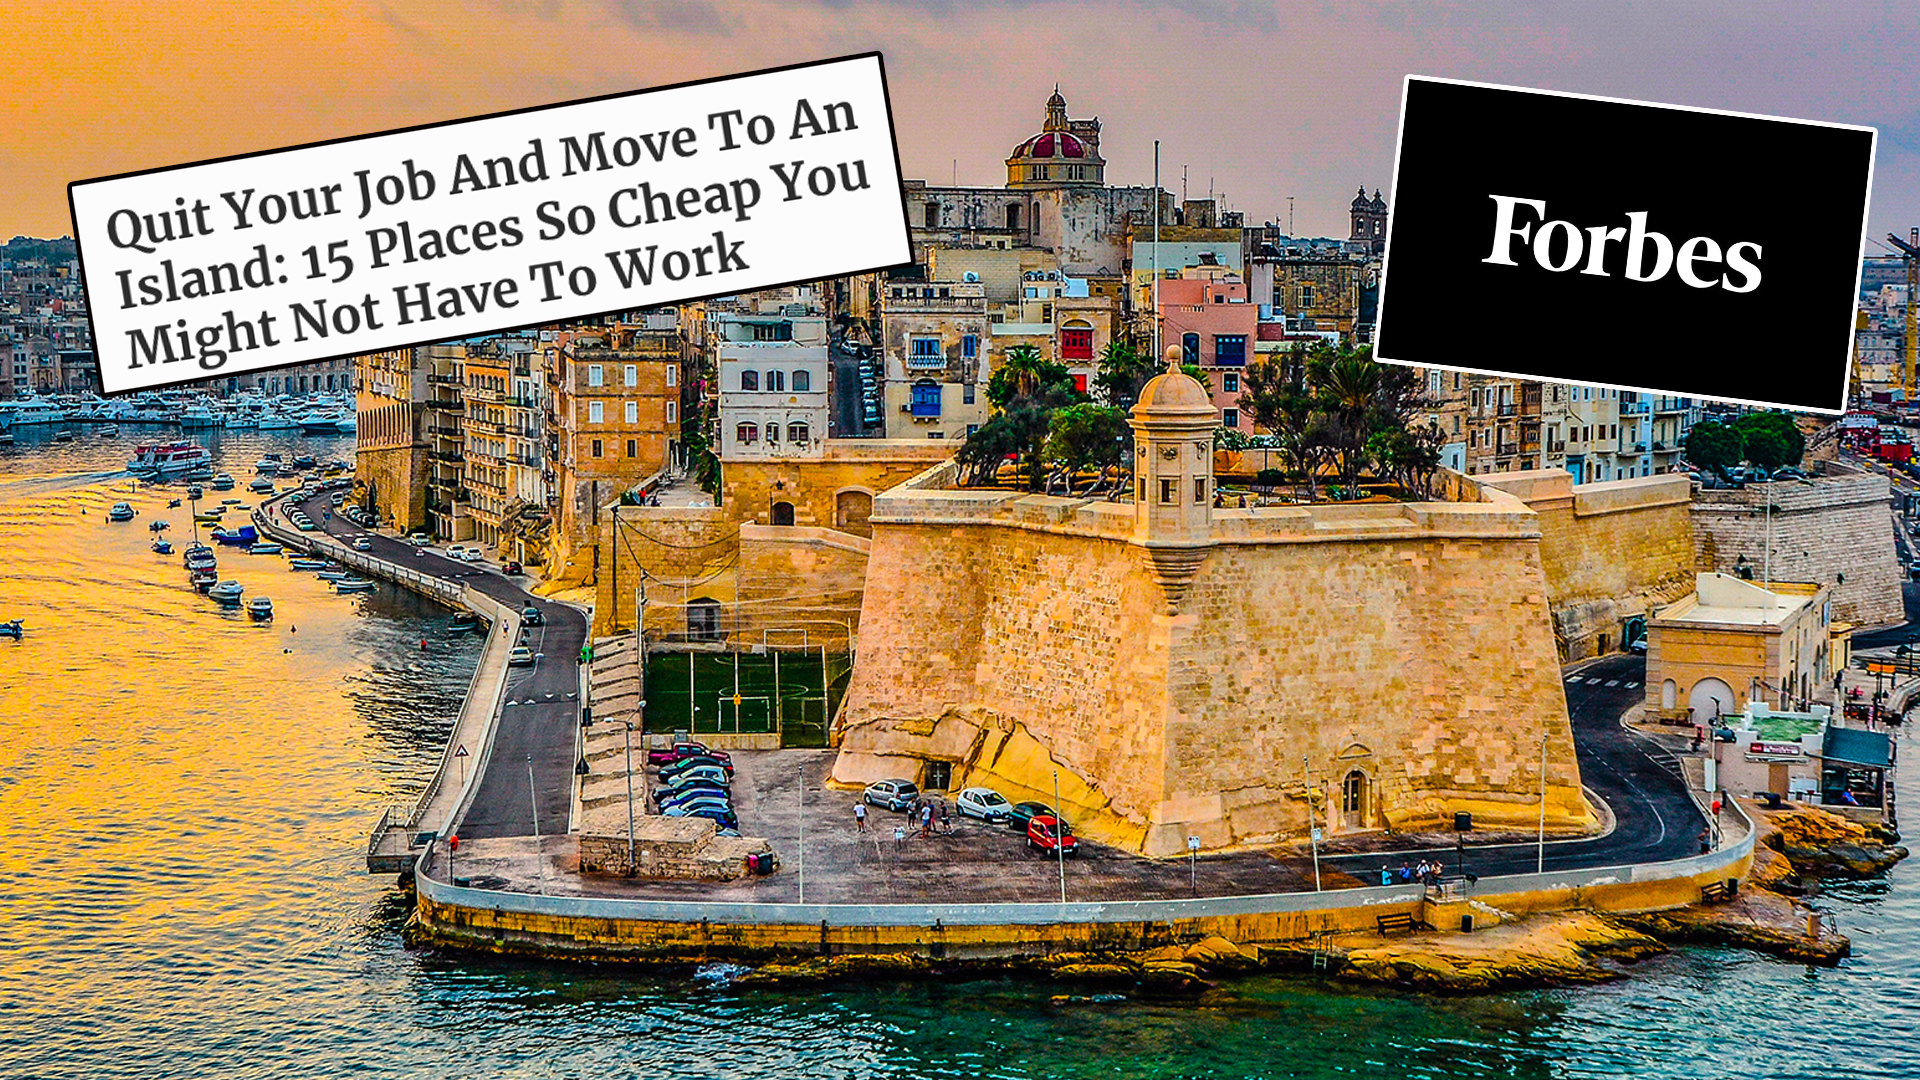 Malta makes it onto Forbes’ ‘Quit your job and move to an island’ list